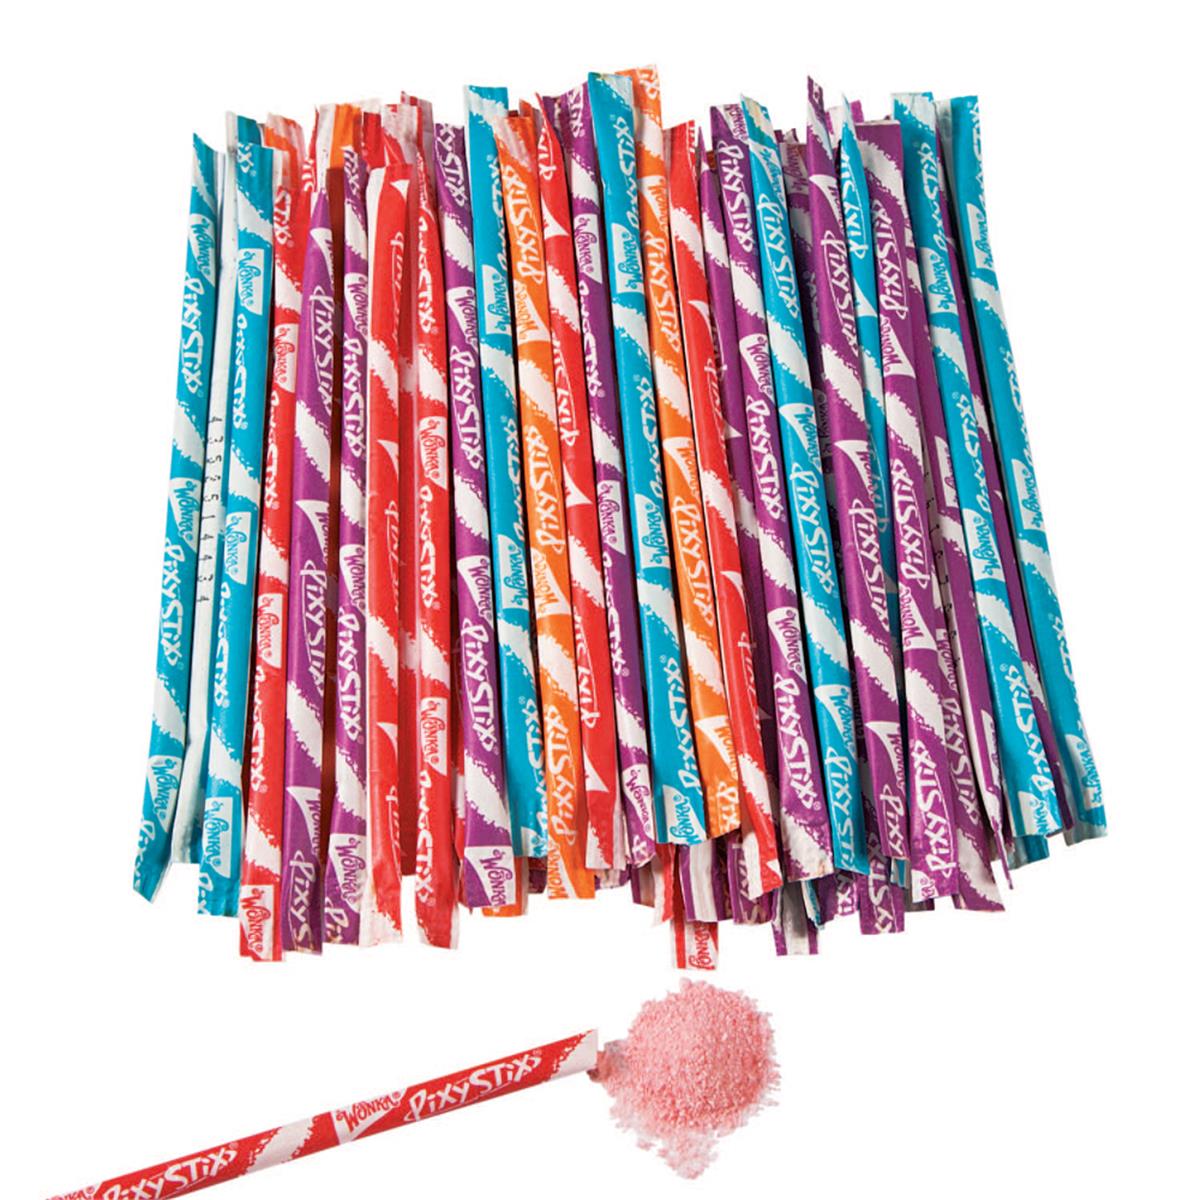 Picture of Fun Express 264425 Pixy Stix - 144 Count